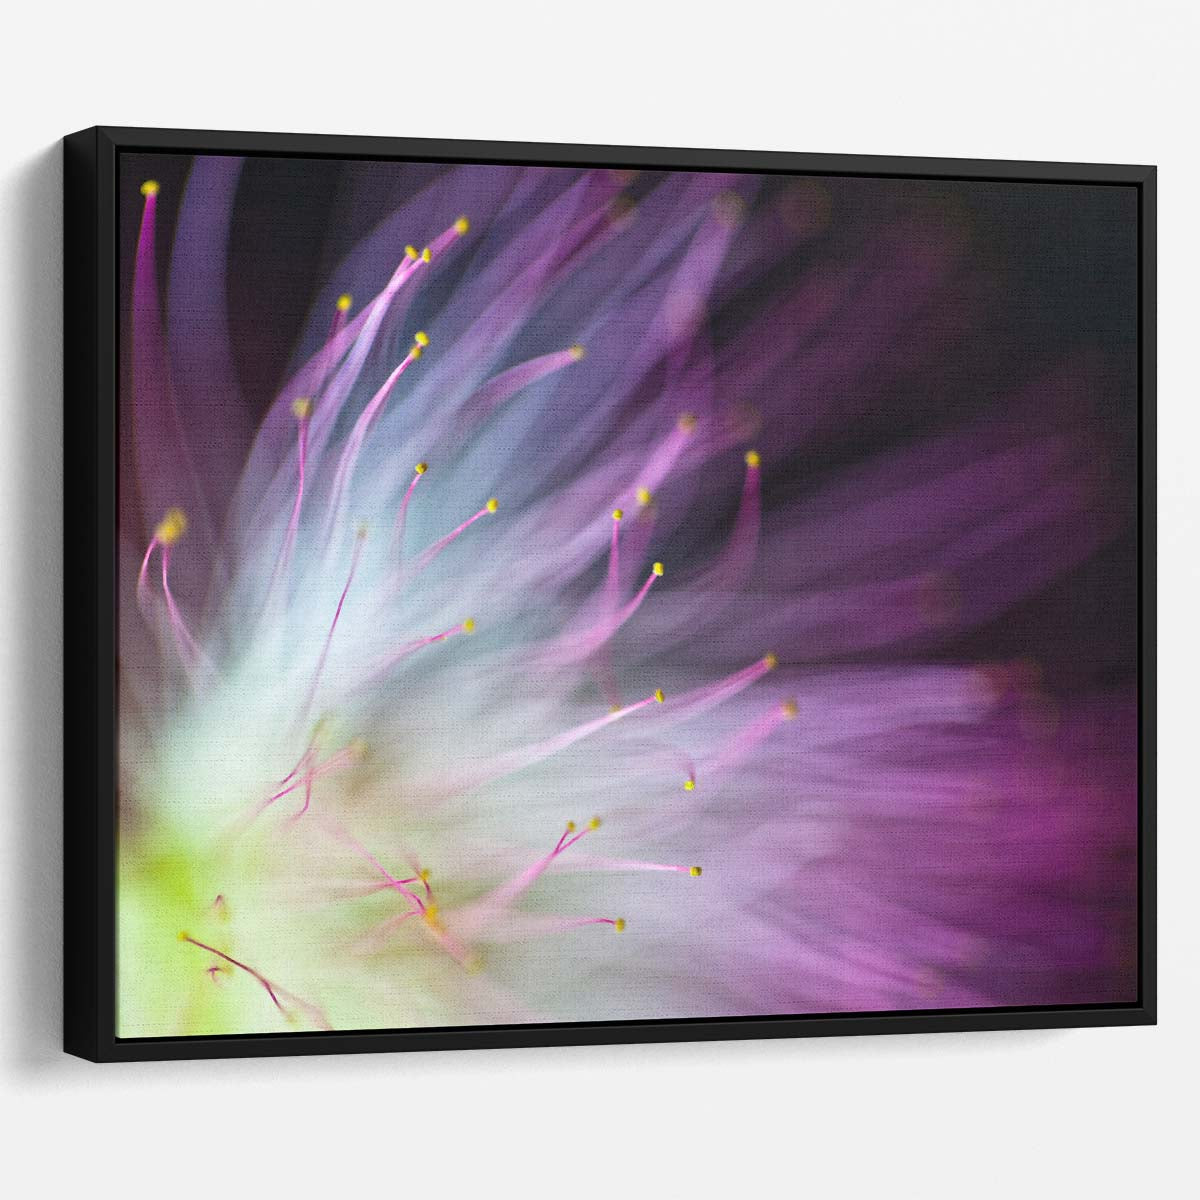 Abstract Purple Albizia Macro Floral Explosion Wall Art by Luxuriance Designs. Made in USA.